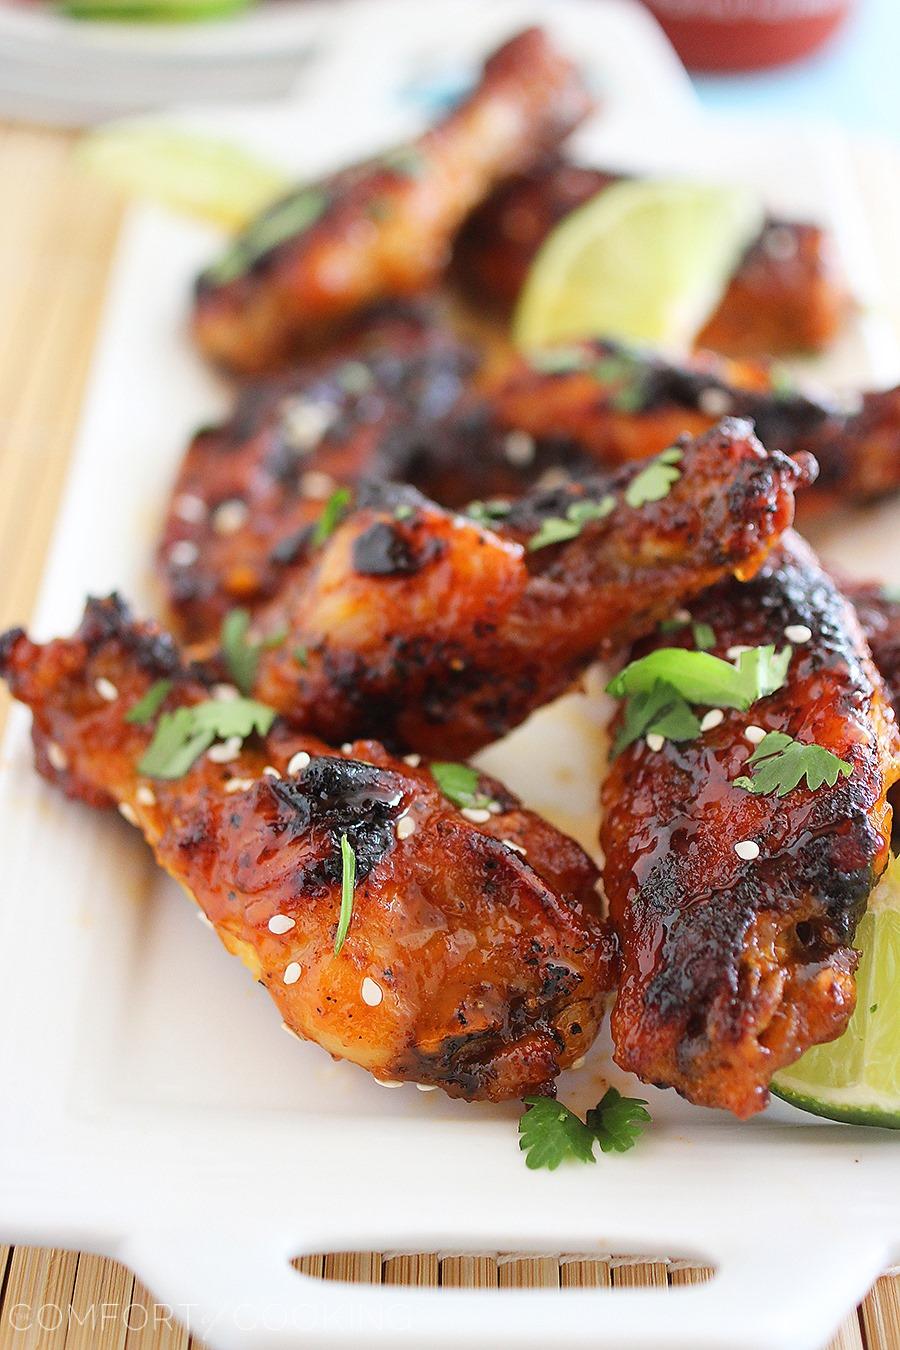 Baked Honey-Sriracha Chicken Wings – Spicy, sweet and sticky baked wings with Sriracha and honey. Perfect for parties! | thecomfortofcooking.com